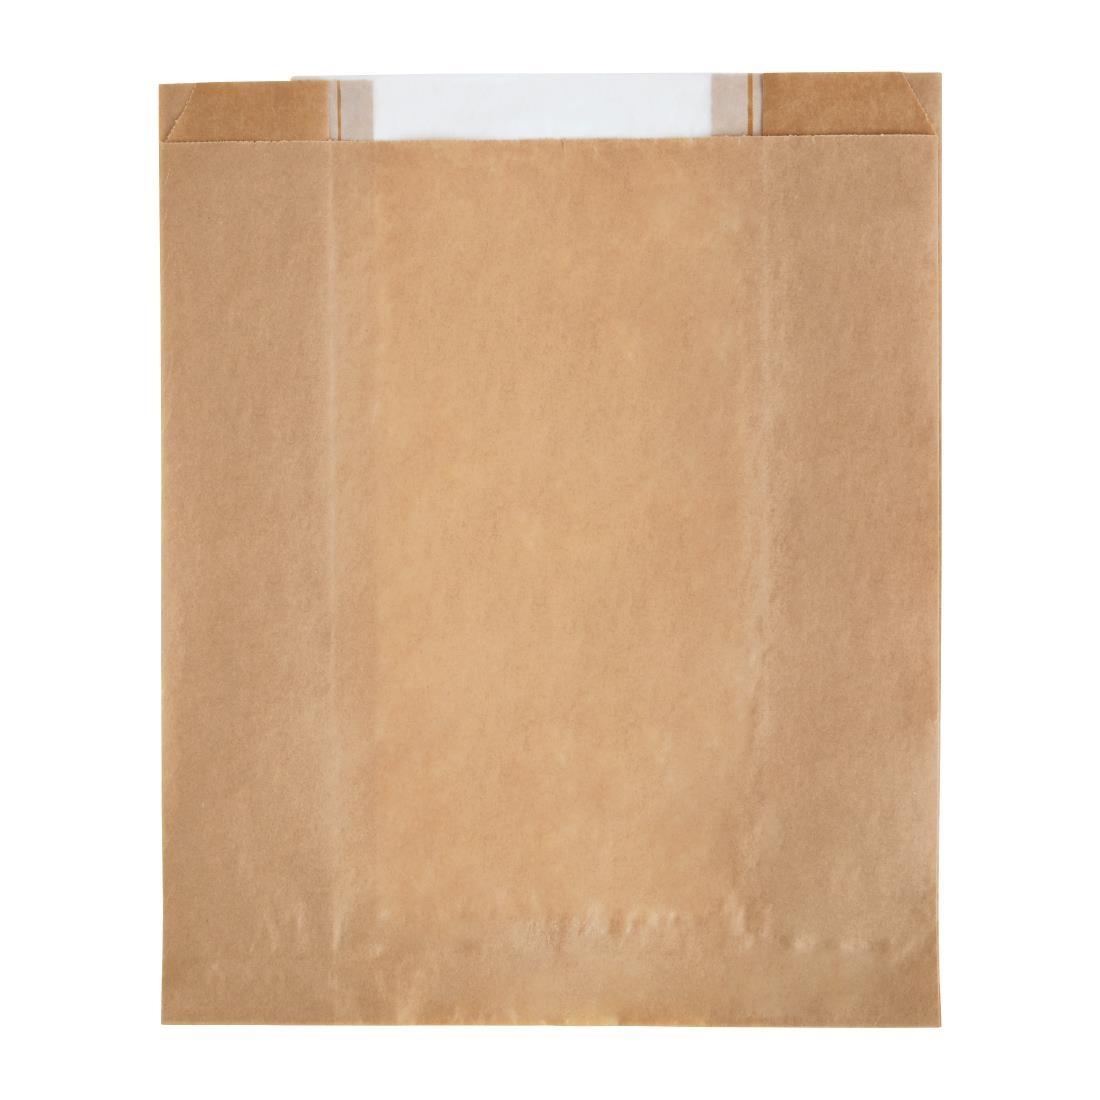 Fiesta Compostable Food Bags with Glassine Windows (Pack of 1000) - DC875  - 2